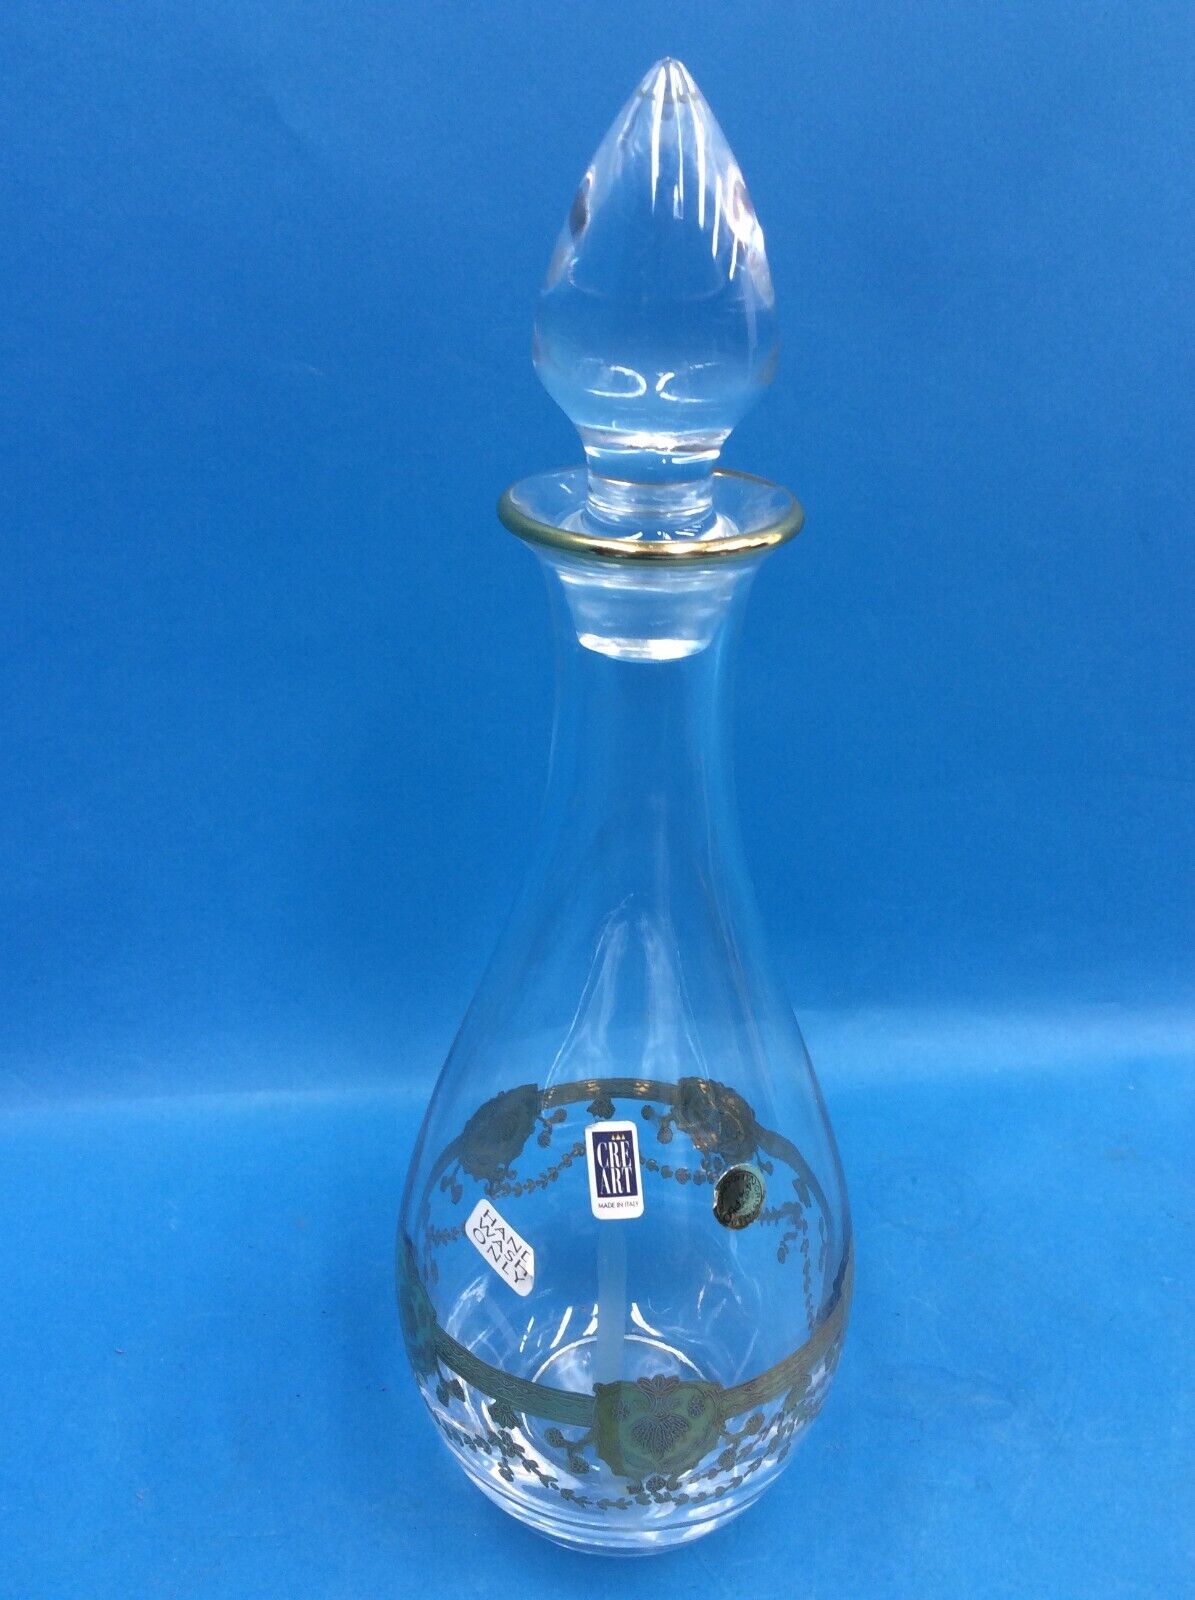 Vintage Used Decorative Clear Lead Crystal Cre Art Made in Italy Decanter Bottle